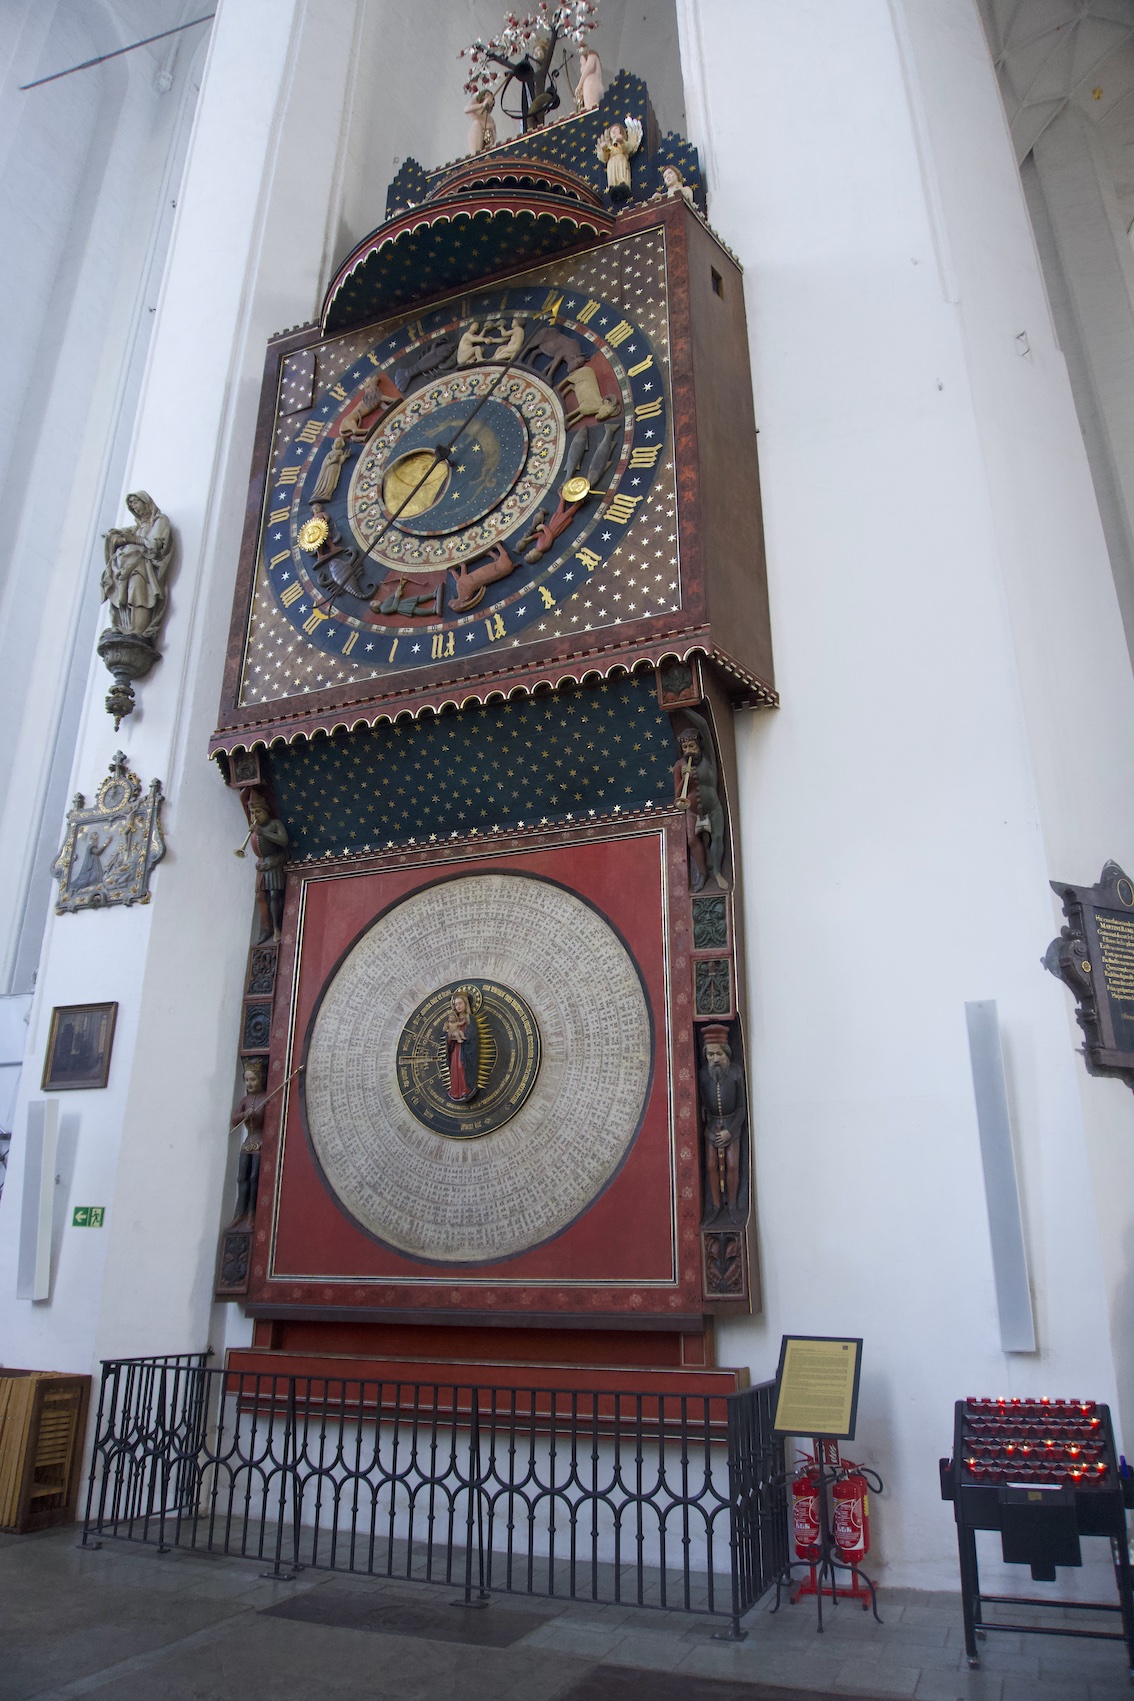 Astronomical clock in Saint Mary's church Gdansk